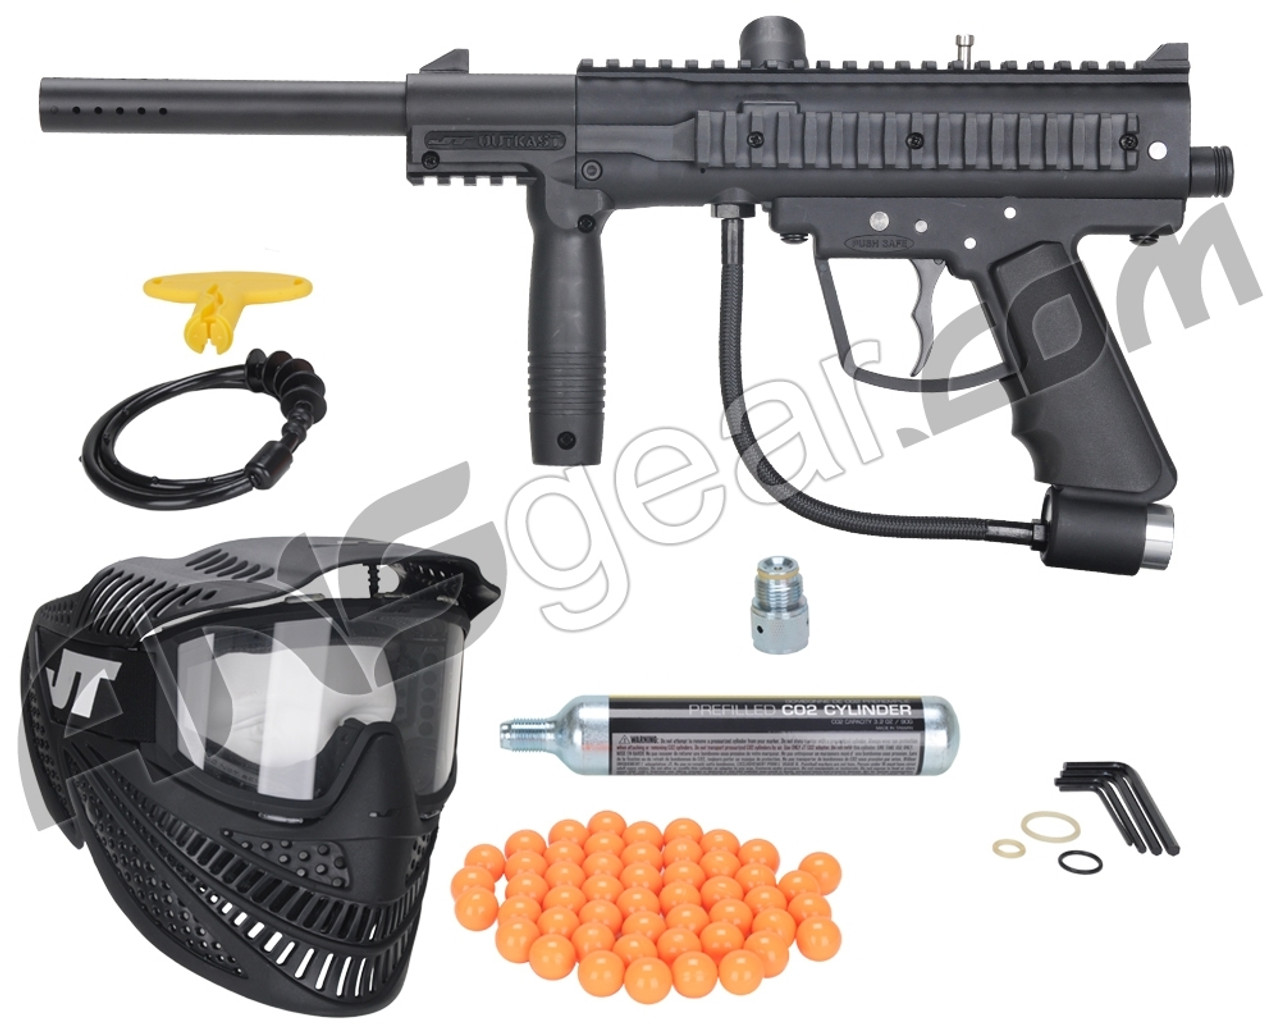 JT Outkast Ready To Play Paintball Gun Kit